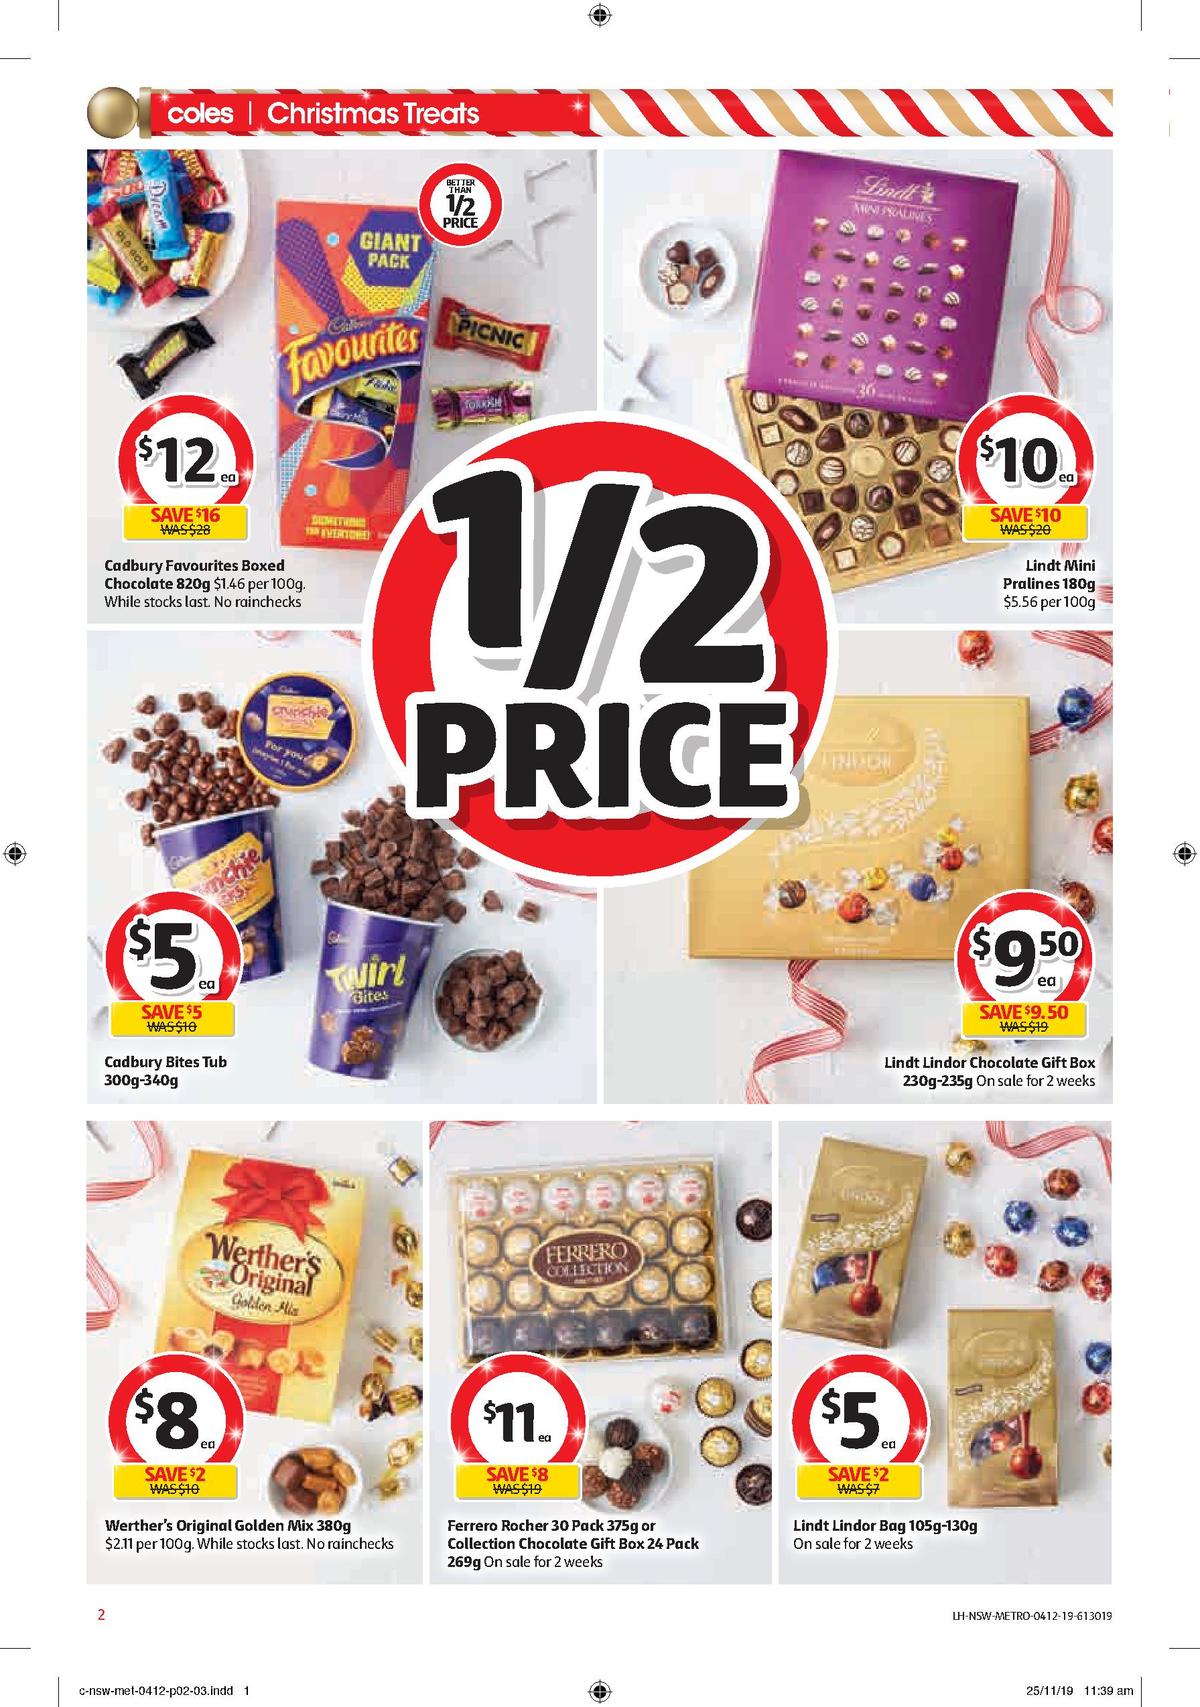 Coles Catalogues from 4 December